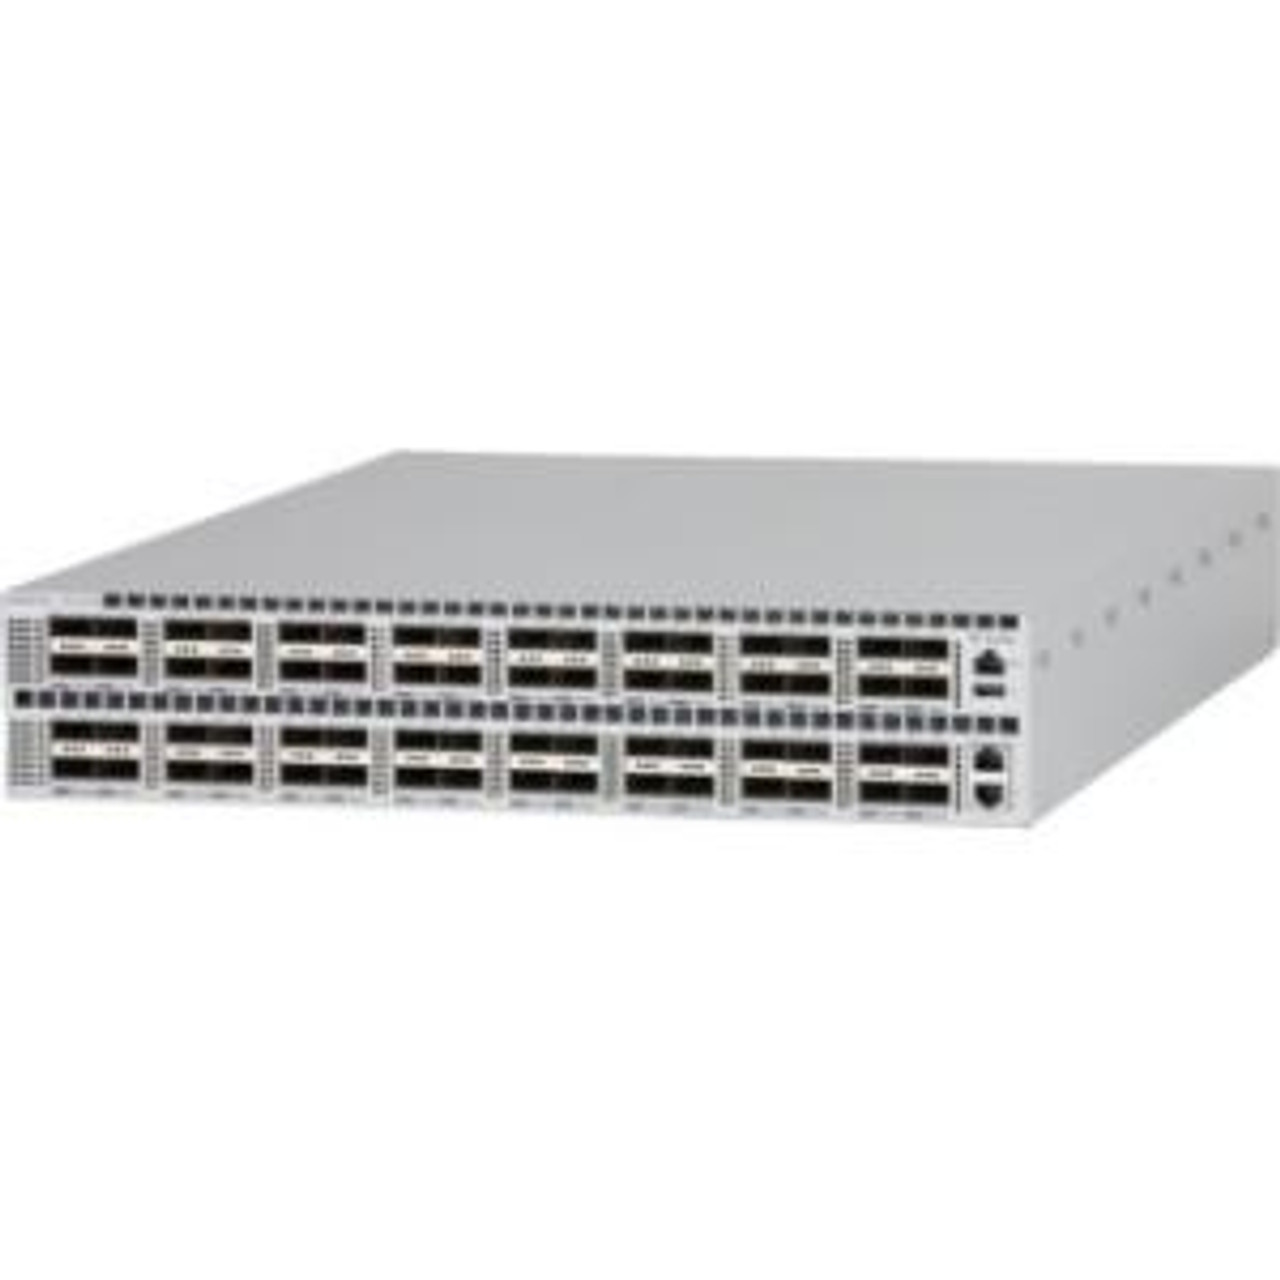 JH798A HP Arista 7250 64QSFP+ Back-to-Front AC Switch 64 x 40 Gigabit Ethernet Expansion Slot Manageable Optical Fiber Modular 3 Layer Supported